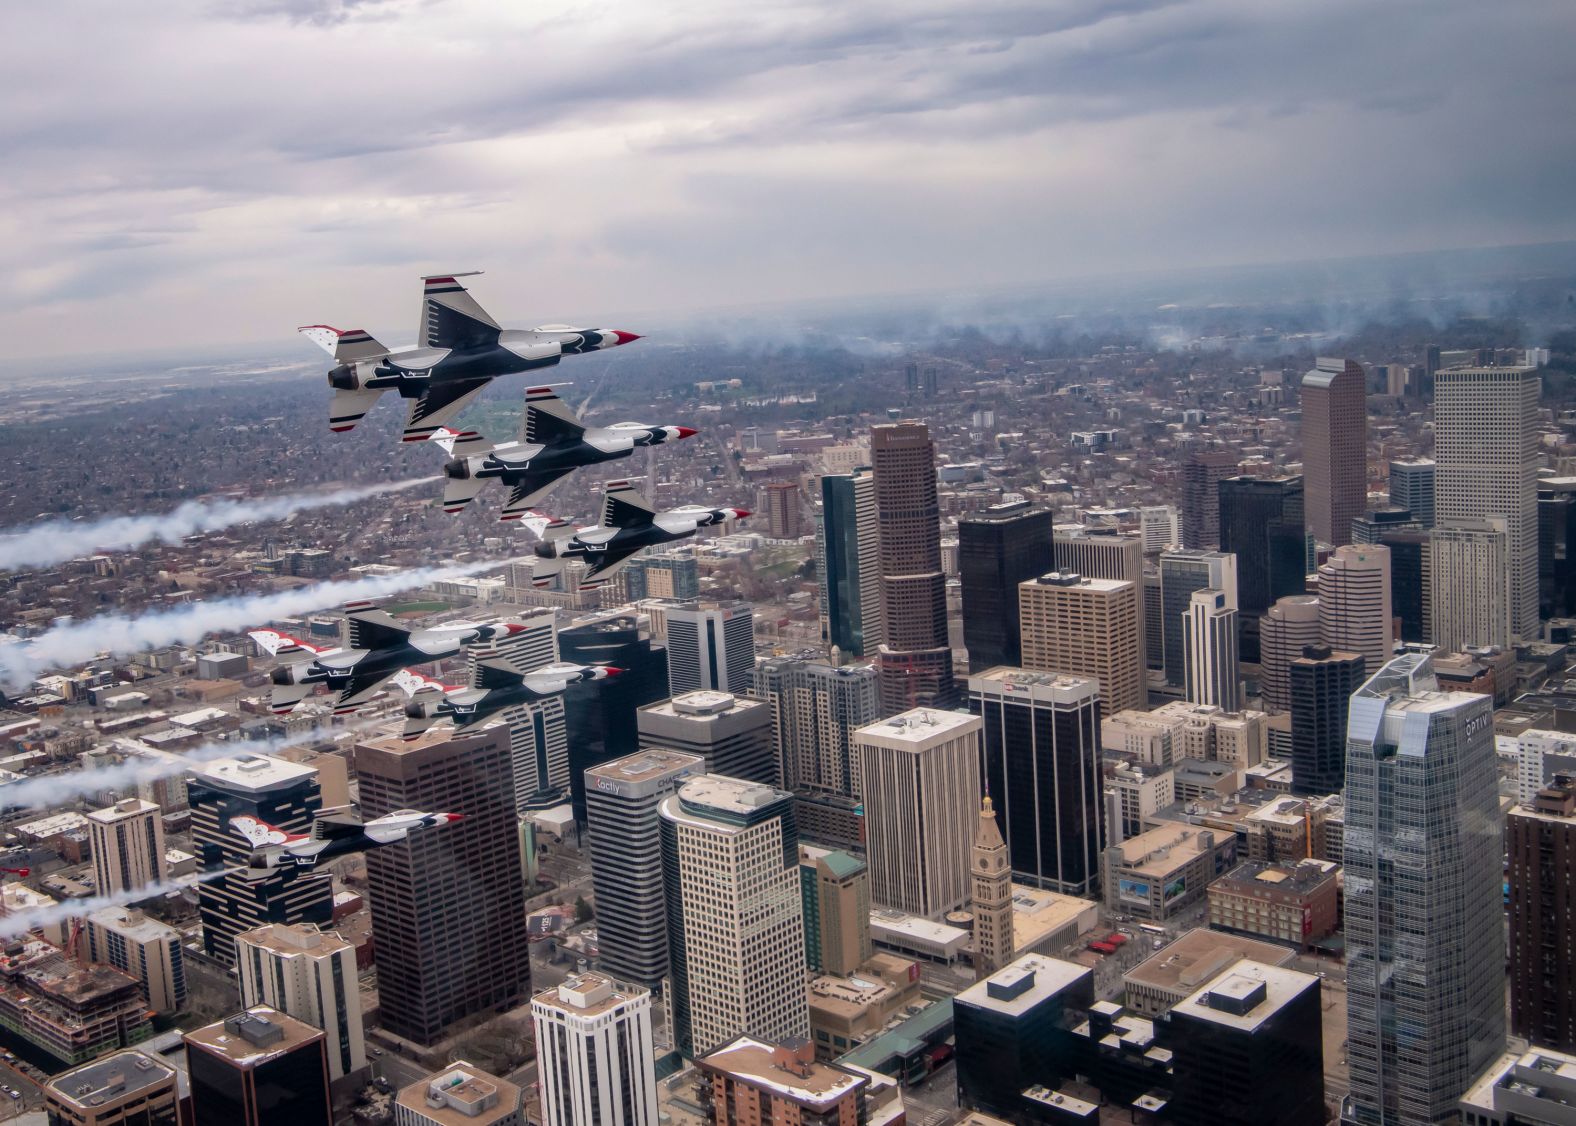 The US Air Force's air demonstration squadron flies over parts of Colorado on April 18 to show appreciation and support for essential workers. The "Thunderbirds" have conducted these flyovers over many cities during the pandemic.